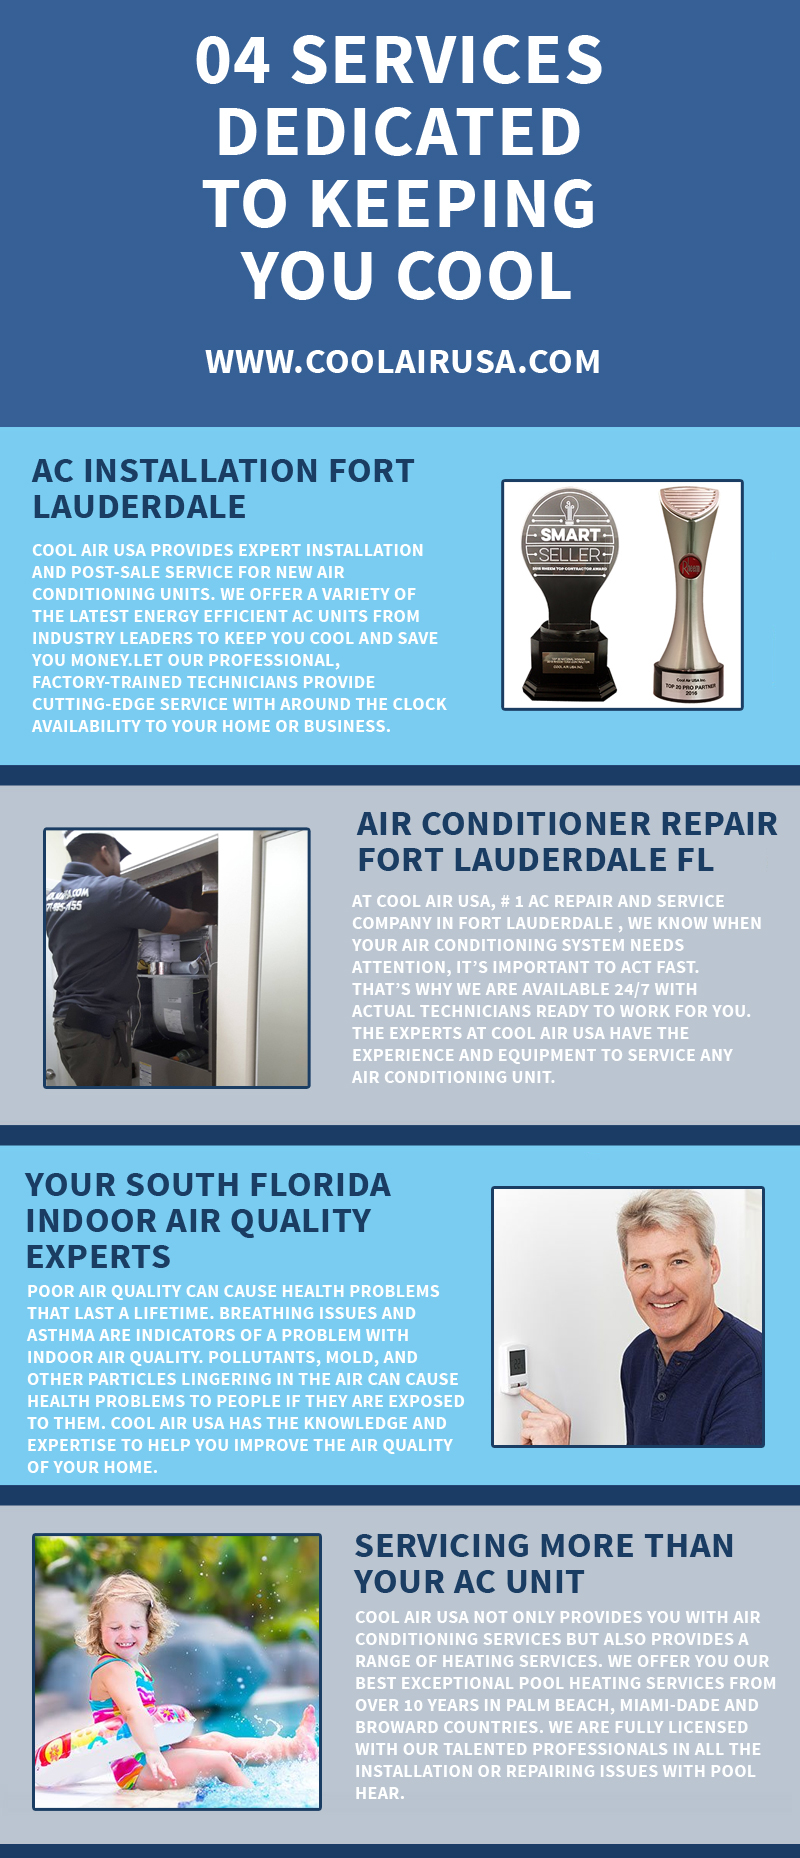 Unknown Facts About Air Conditioning Services & Repairs - Ac - Petro thumbnail